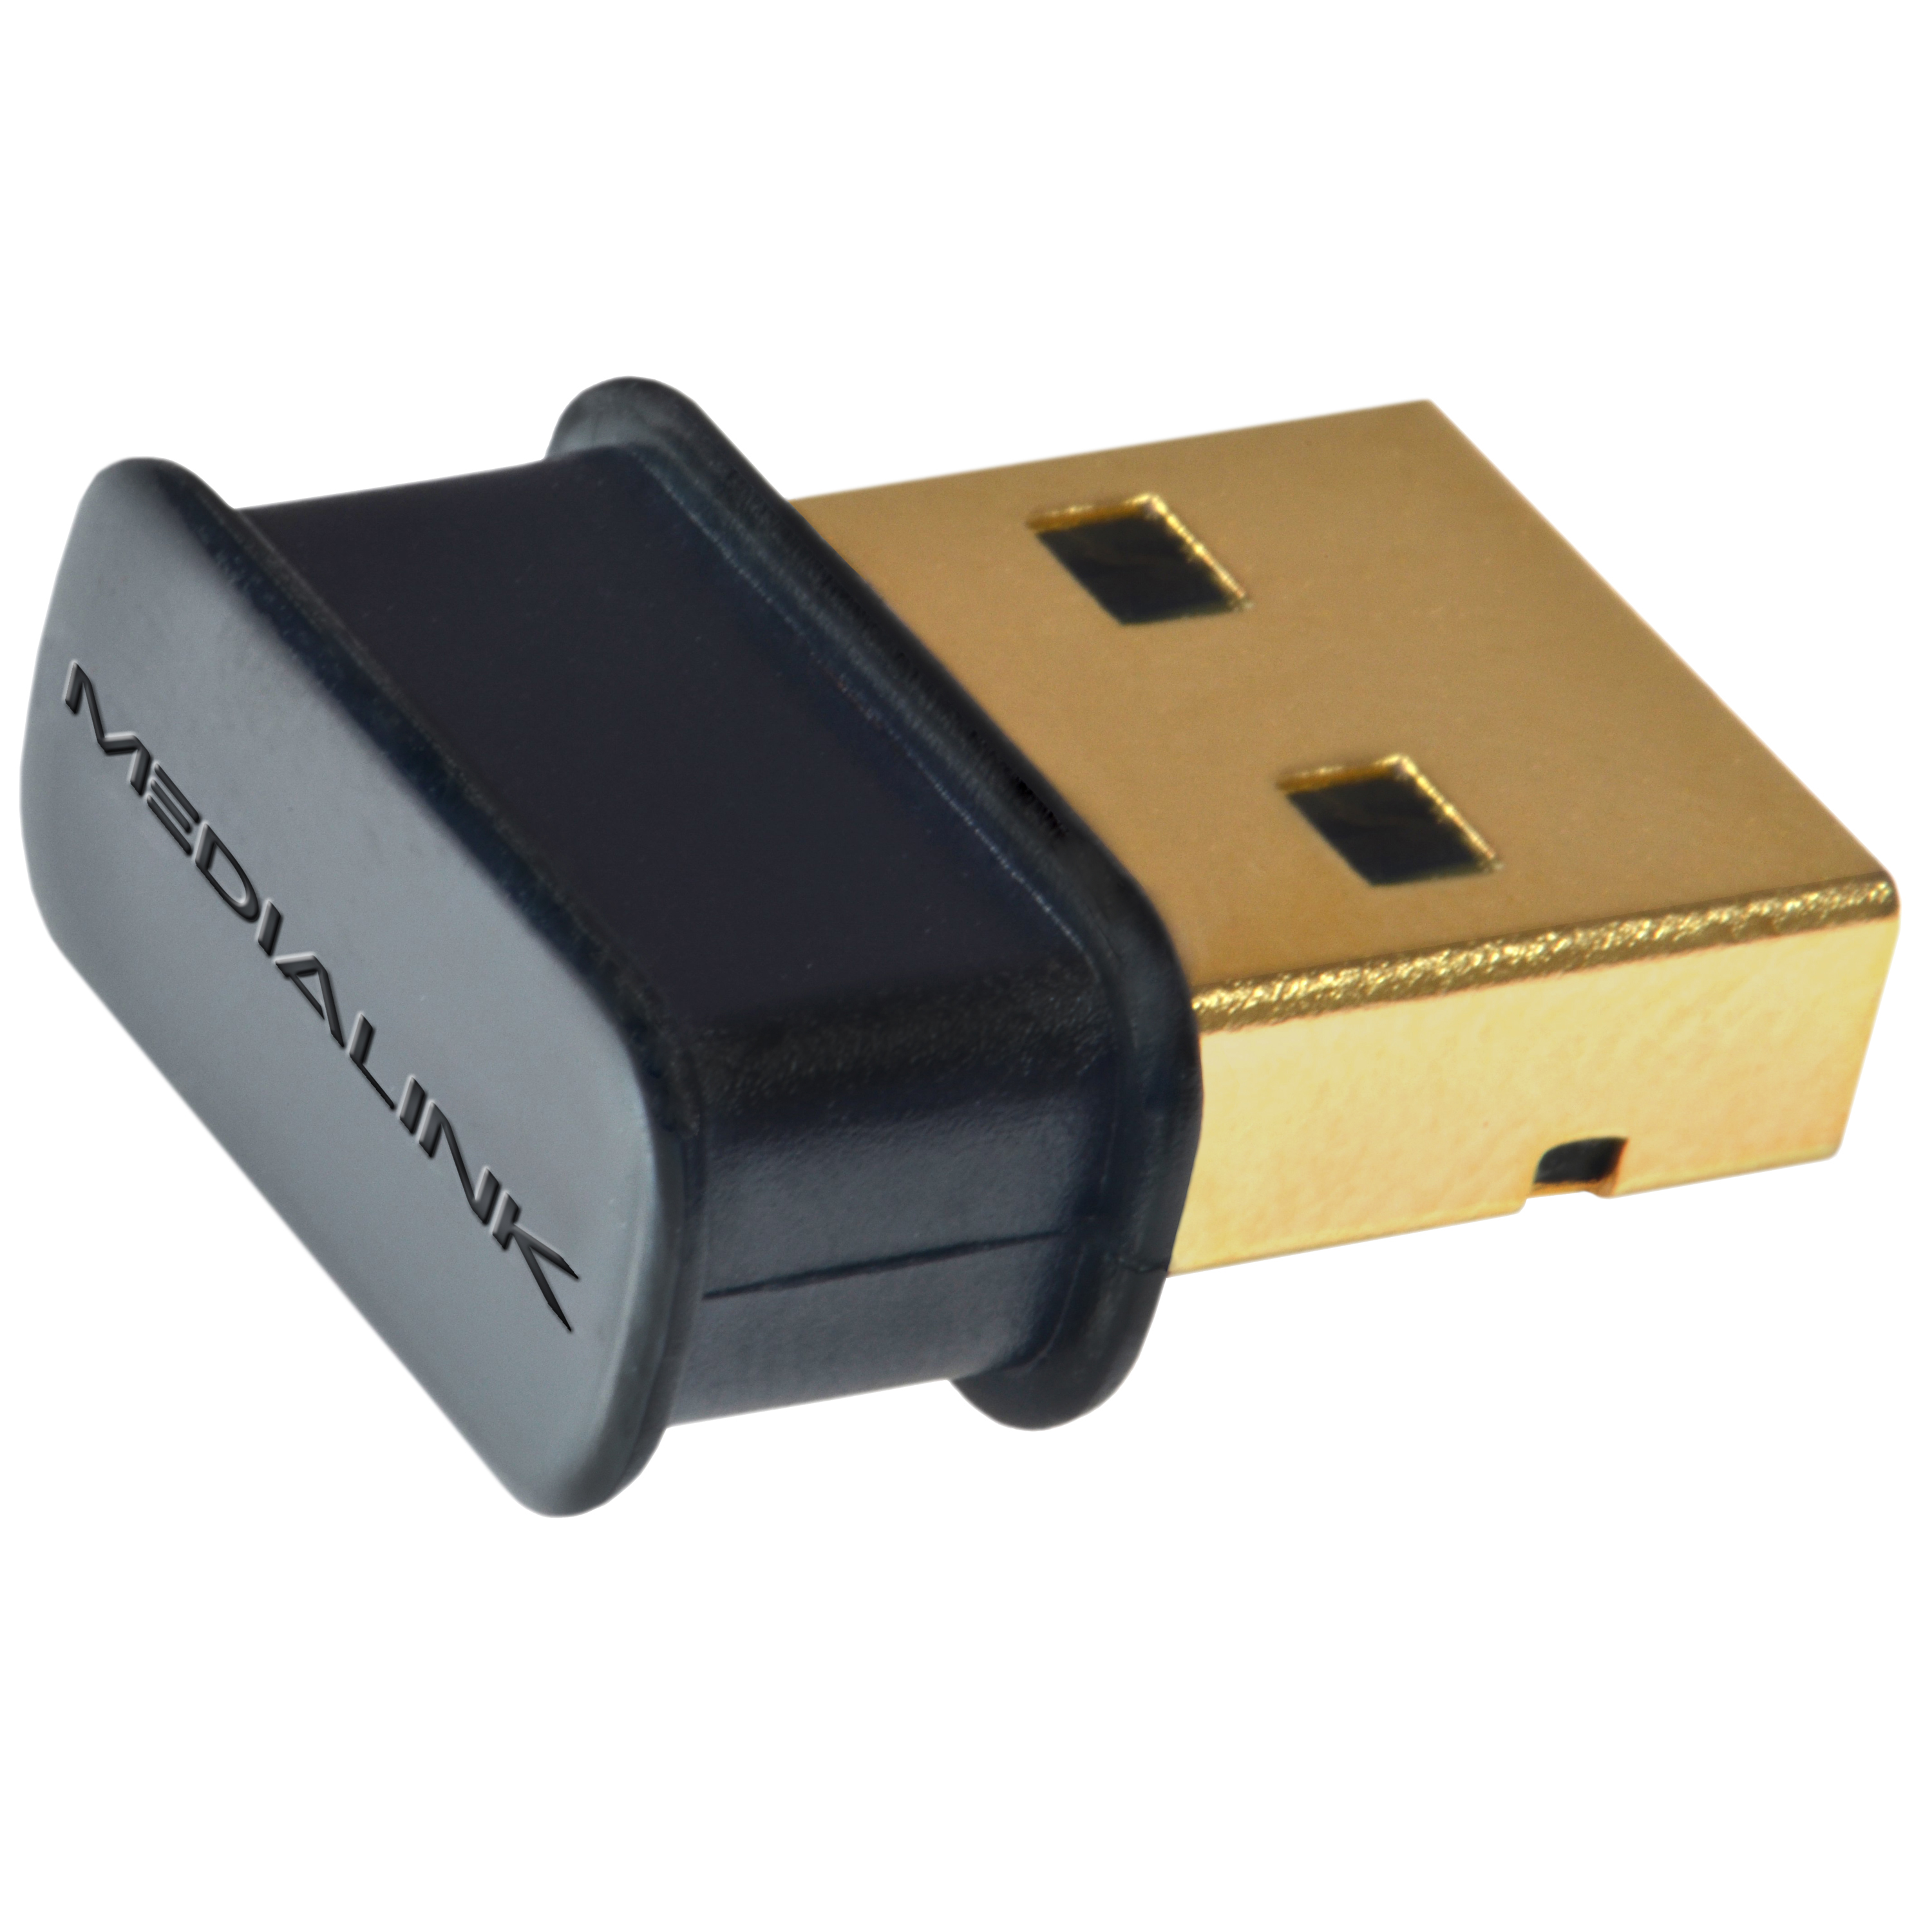 promate bluetooth headset driver/ download last version